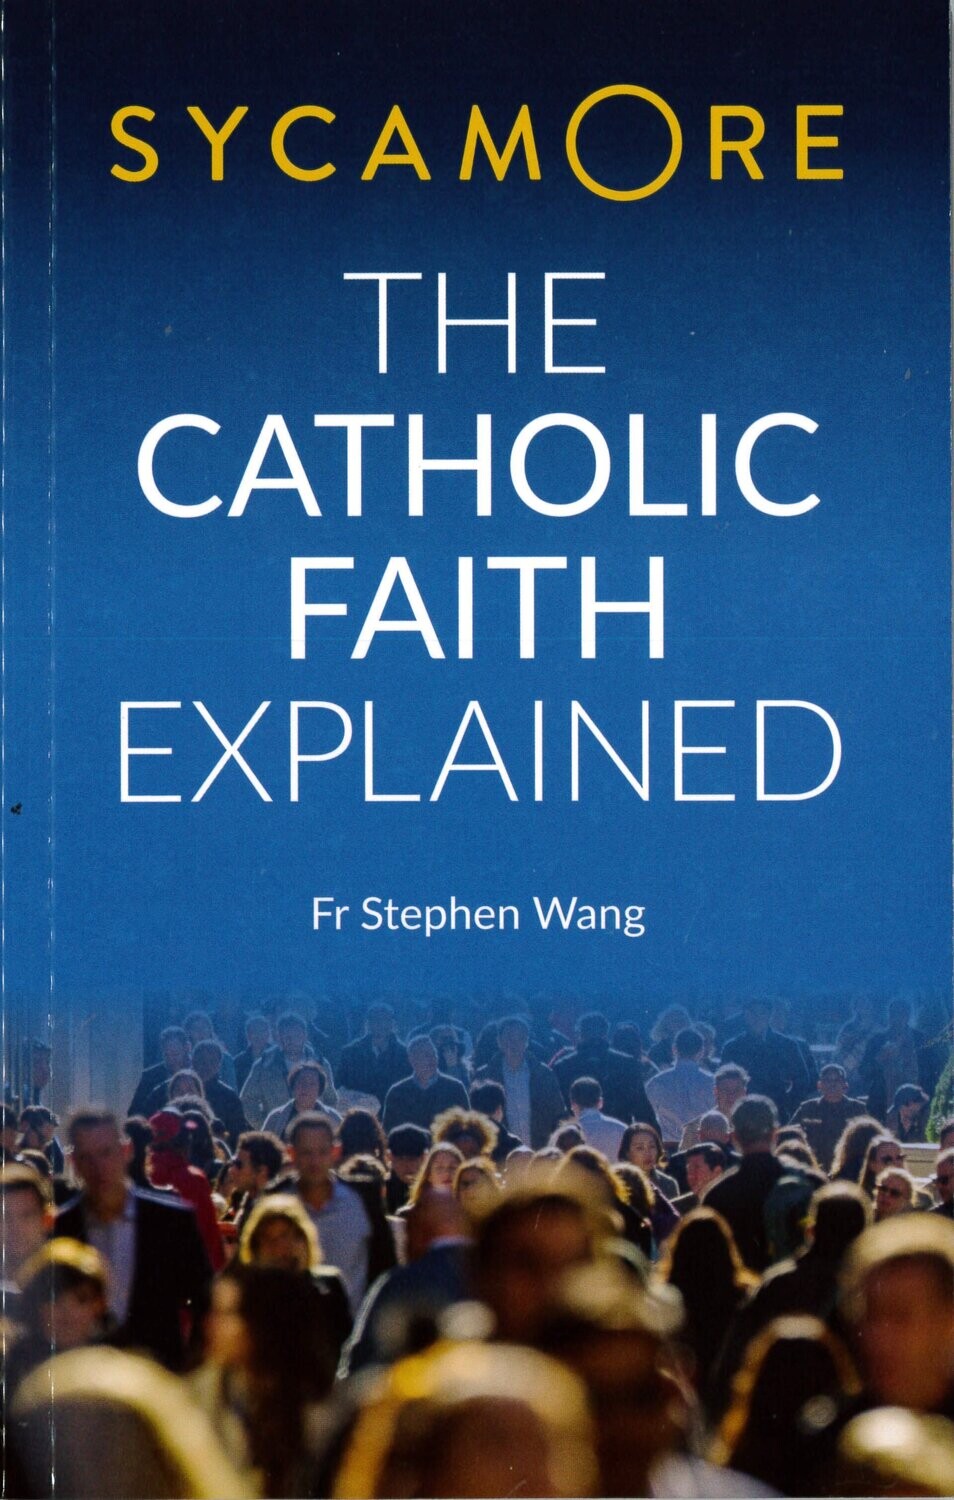 Sycamore: The Catholic Faith Explained by Father Stephen Wang